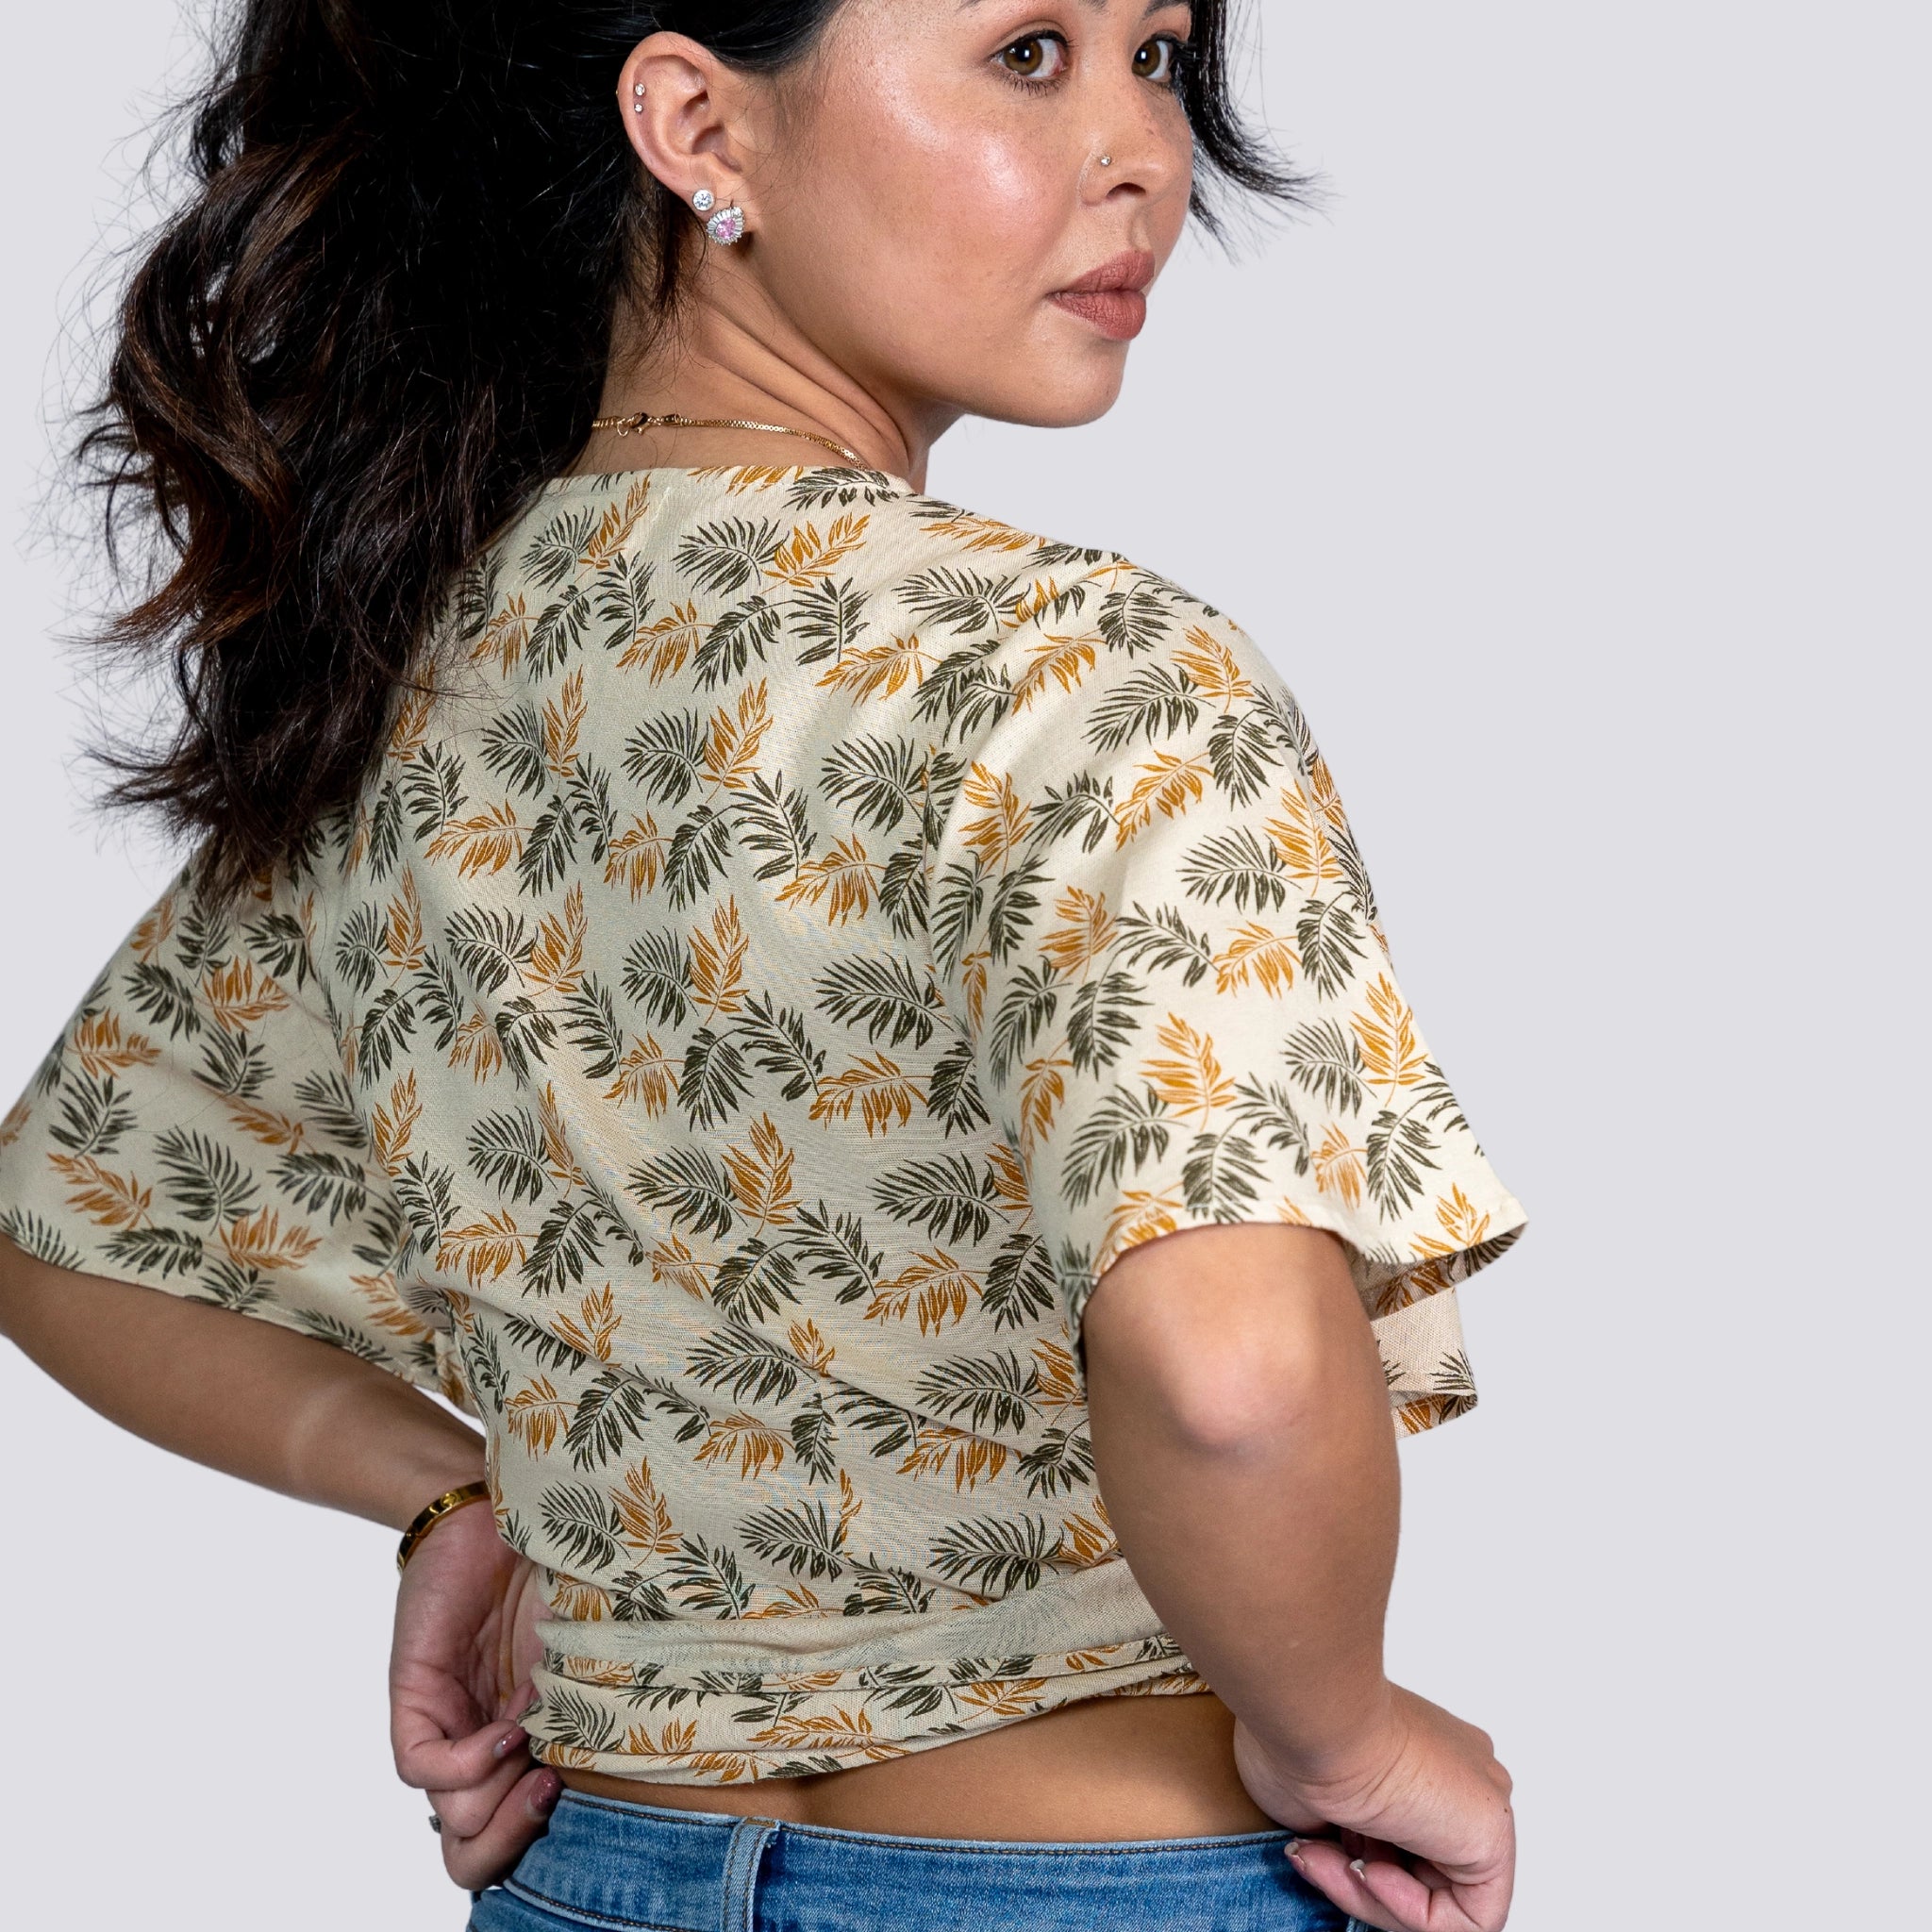 Woman in a ChicPalms Women's Eco-Friendly Wrap Top - Biscuit Bliss and jeans looking over her shoulder against a grey background.